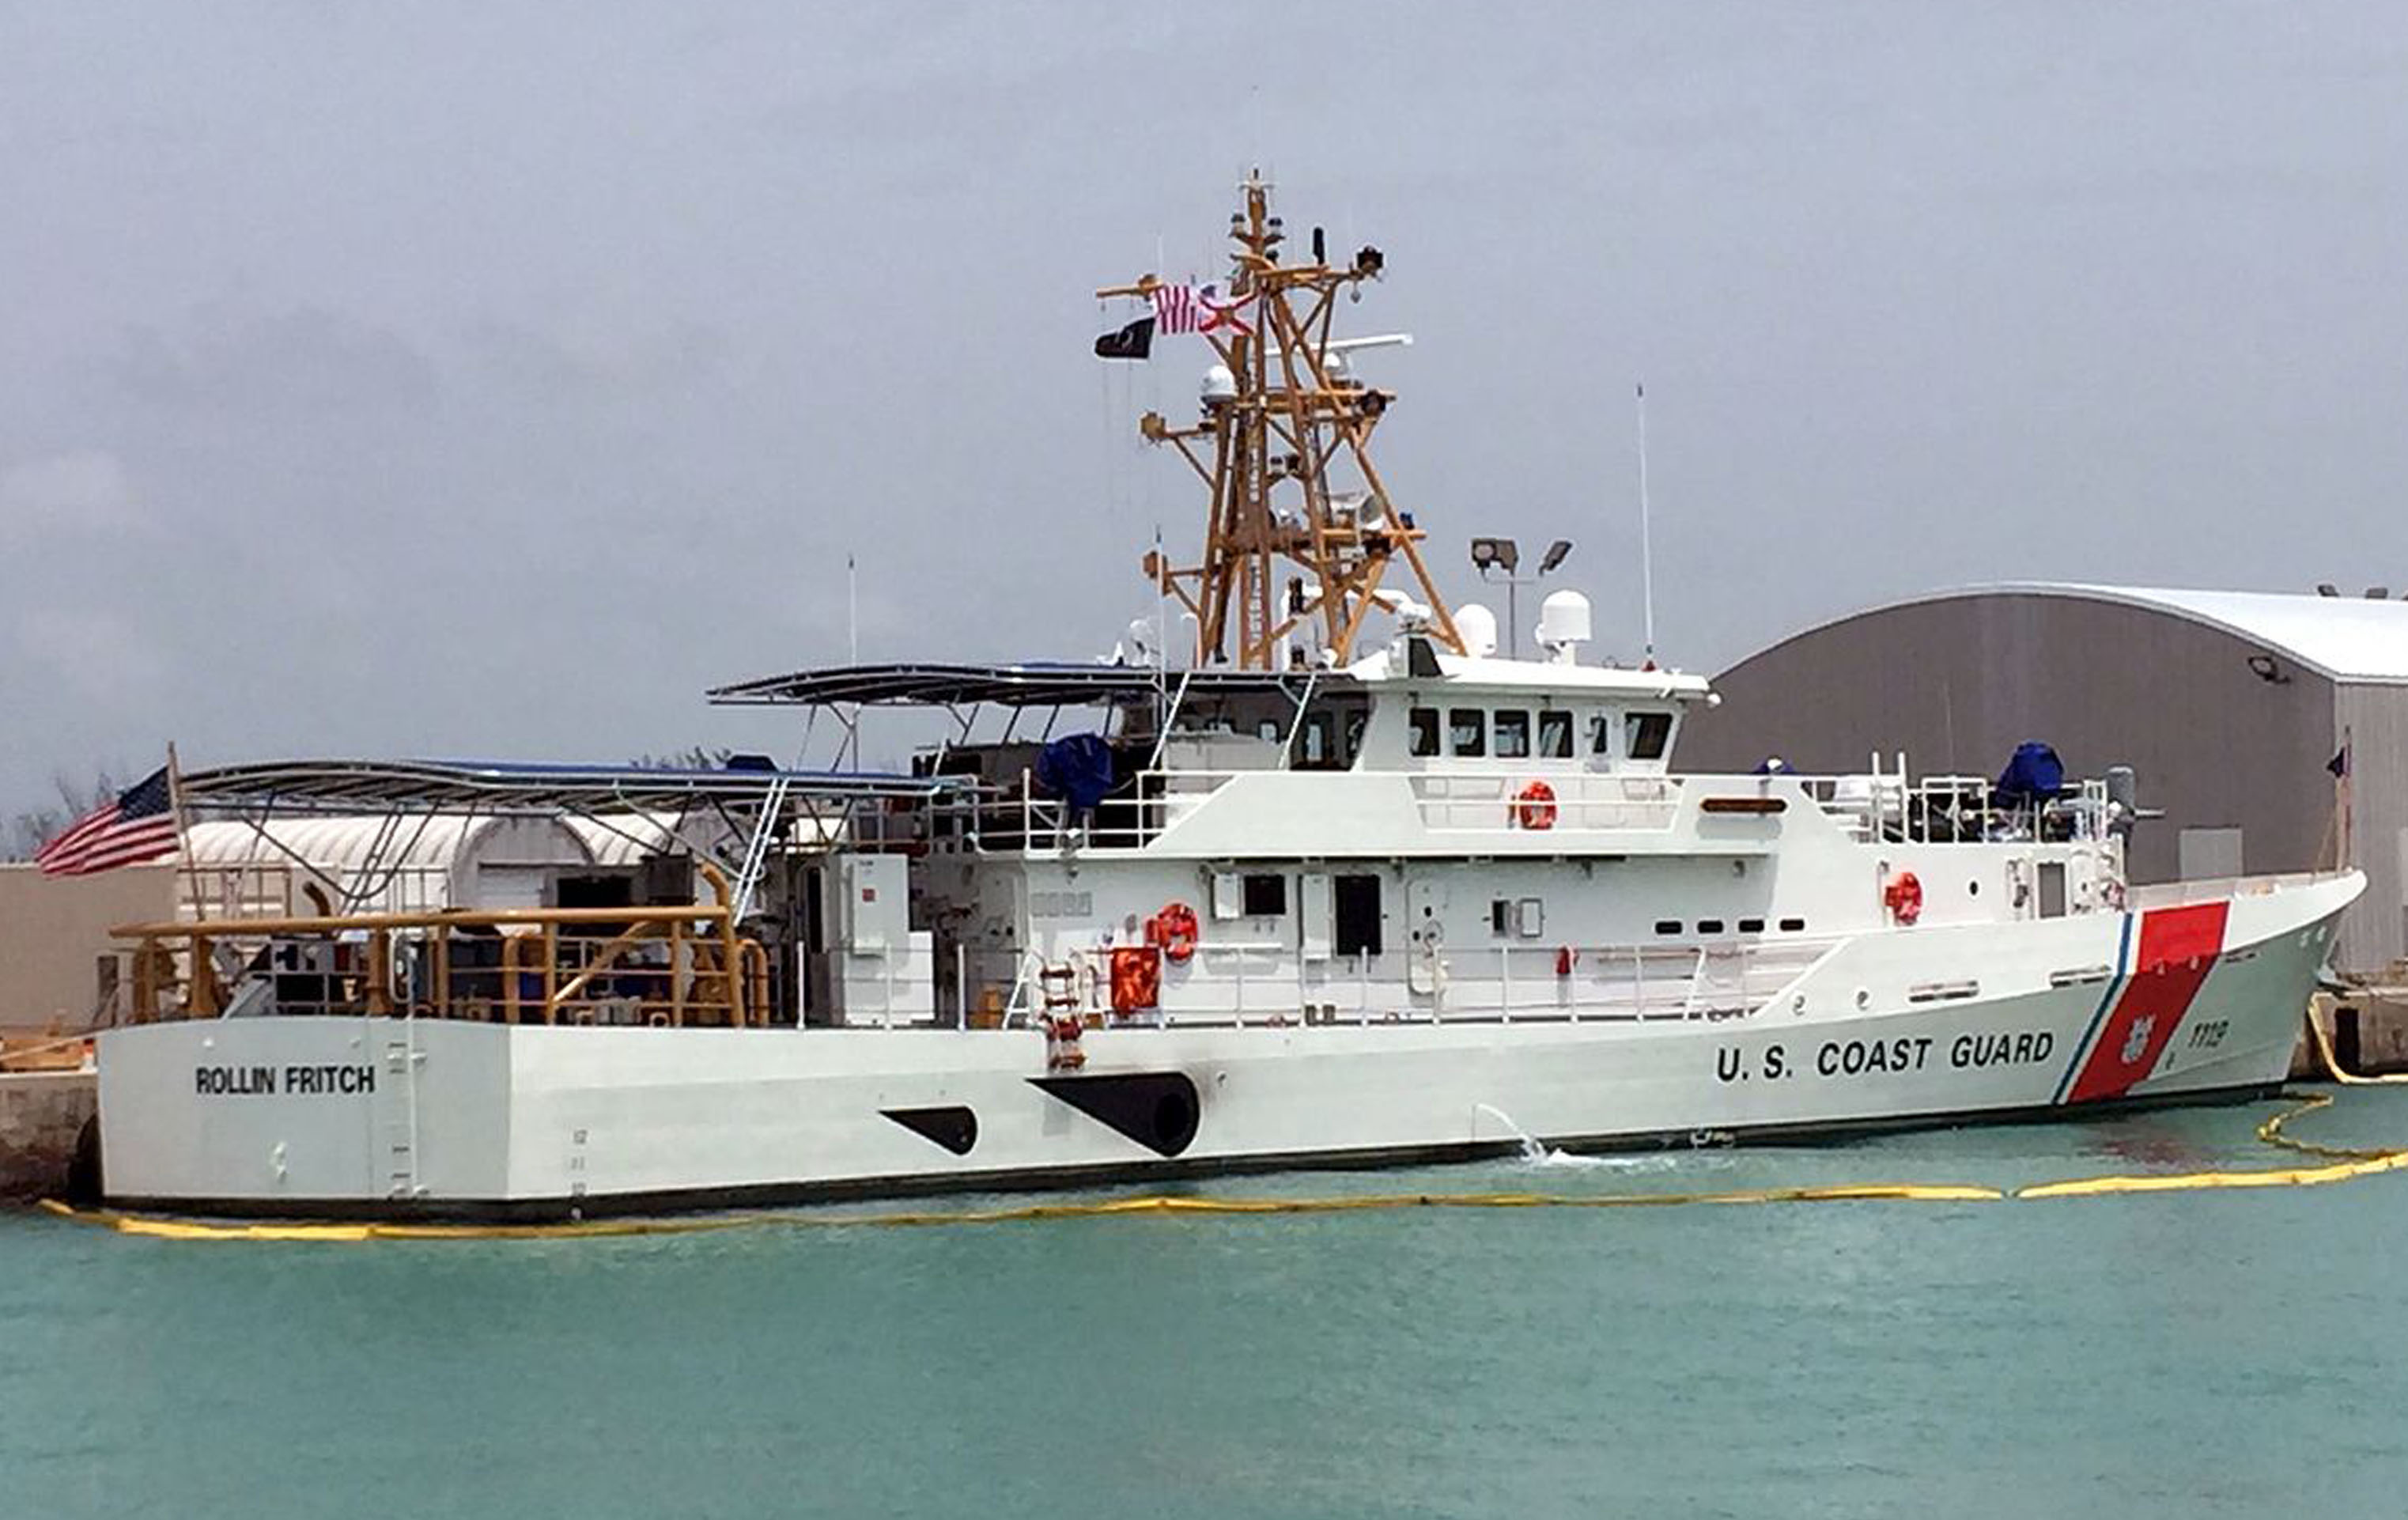 Fast Response Cutter Rollin Fritch underway in 2016. The crew’s primary missions include search and rescue; law enforcement; and ports, waterways, and coastal security. (U.S. Coast Guard) 